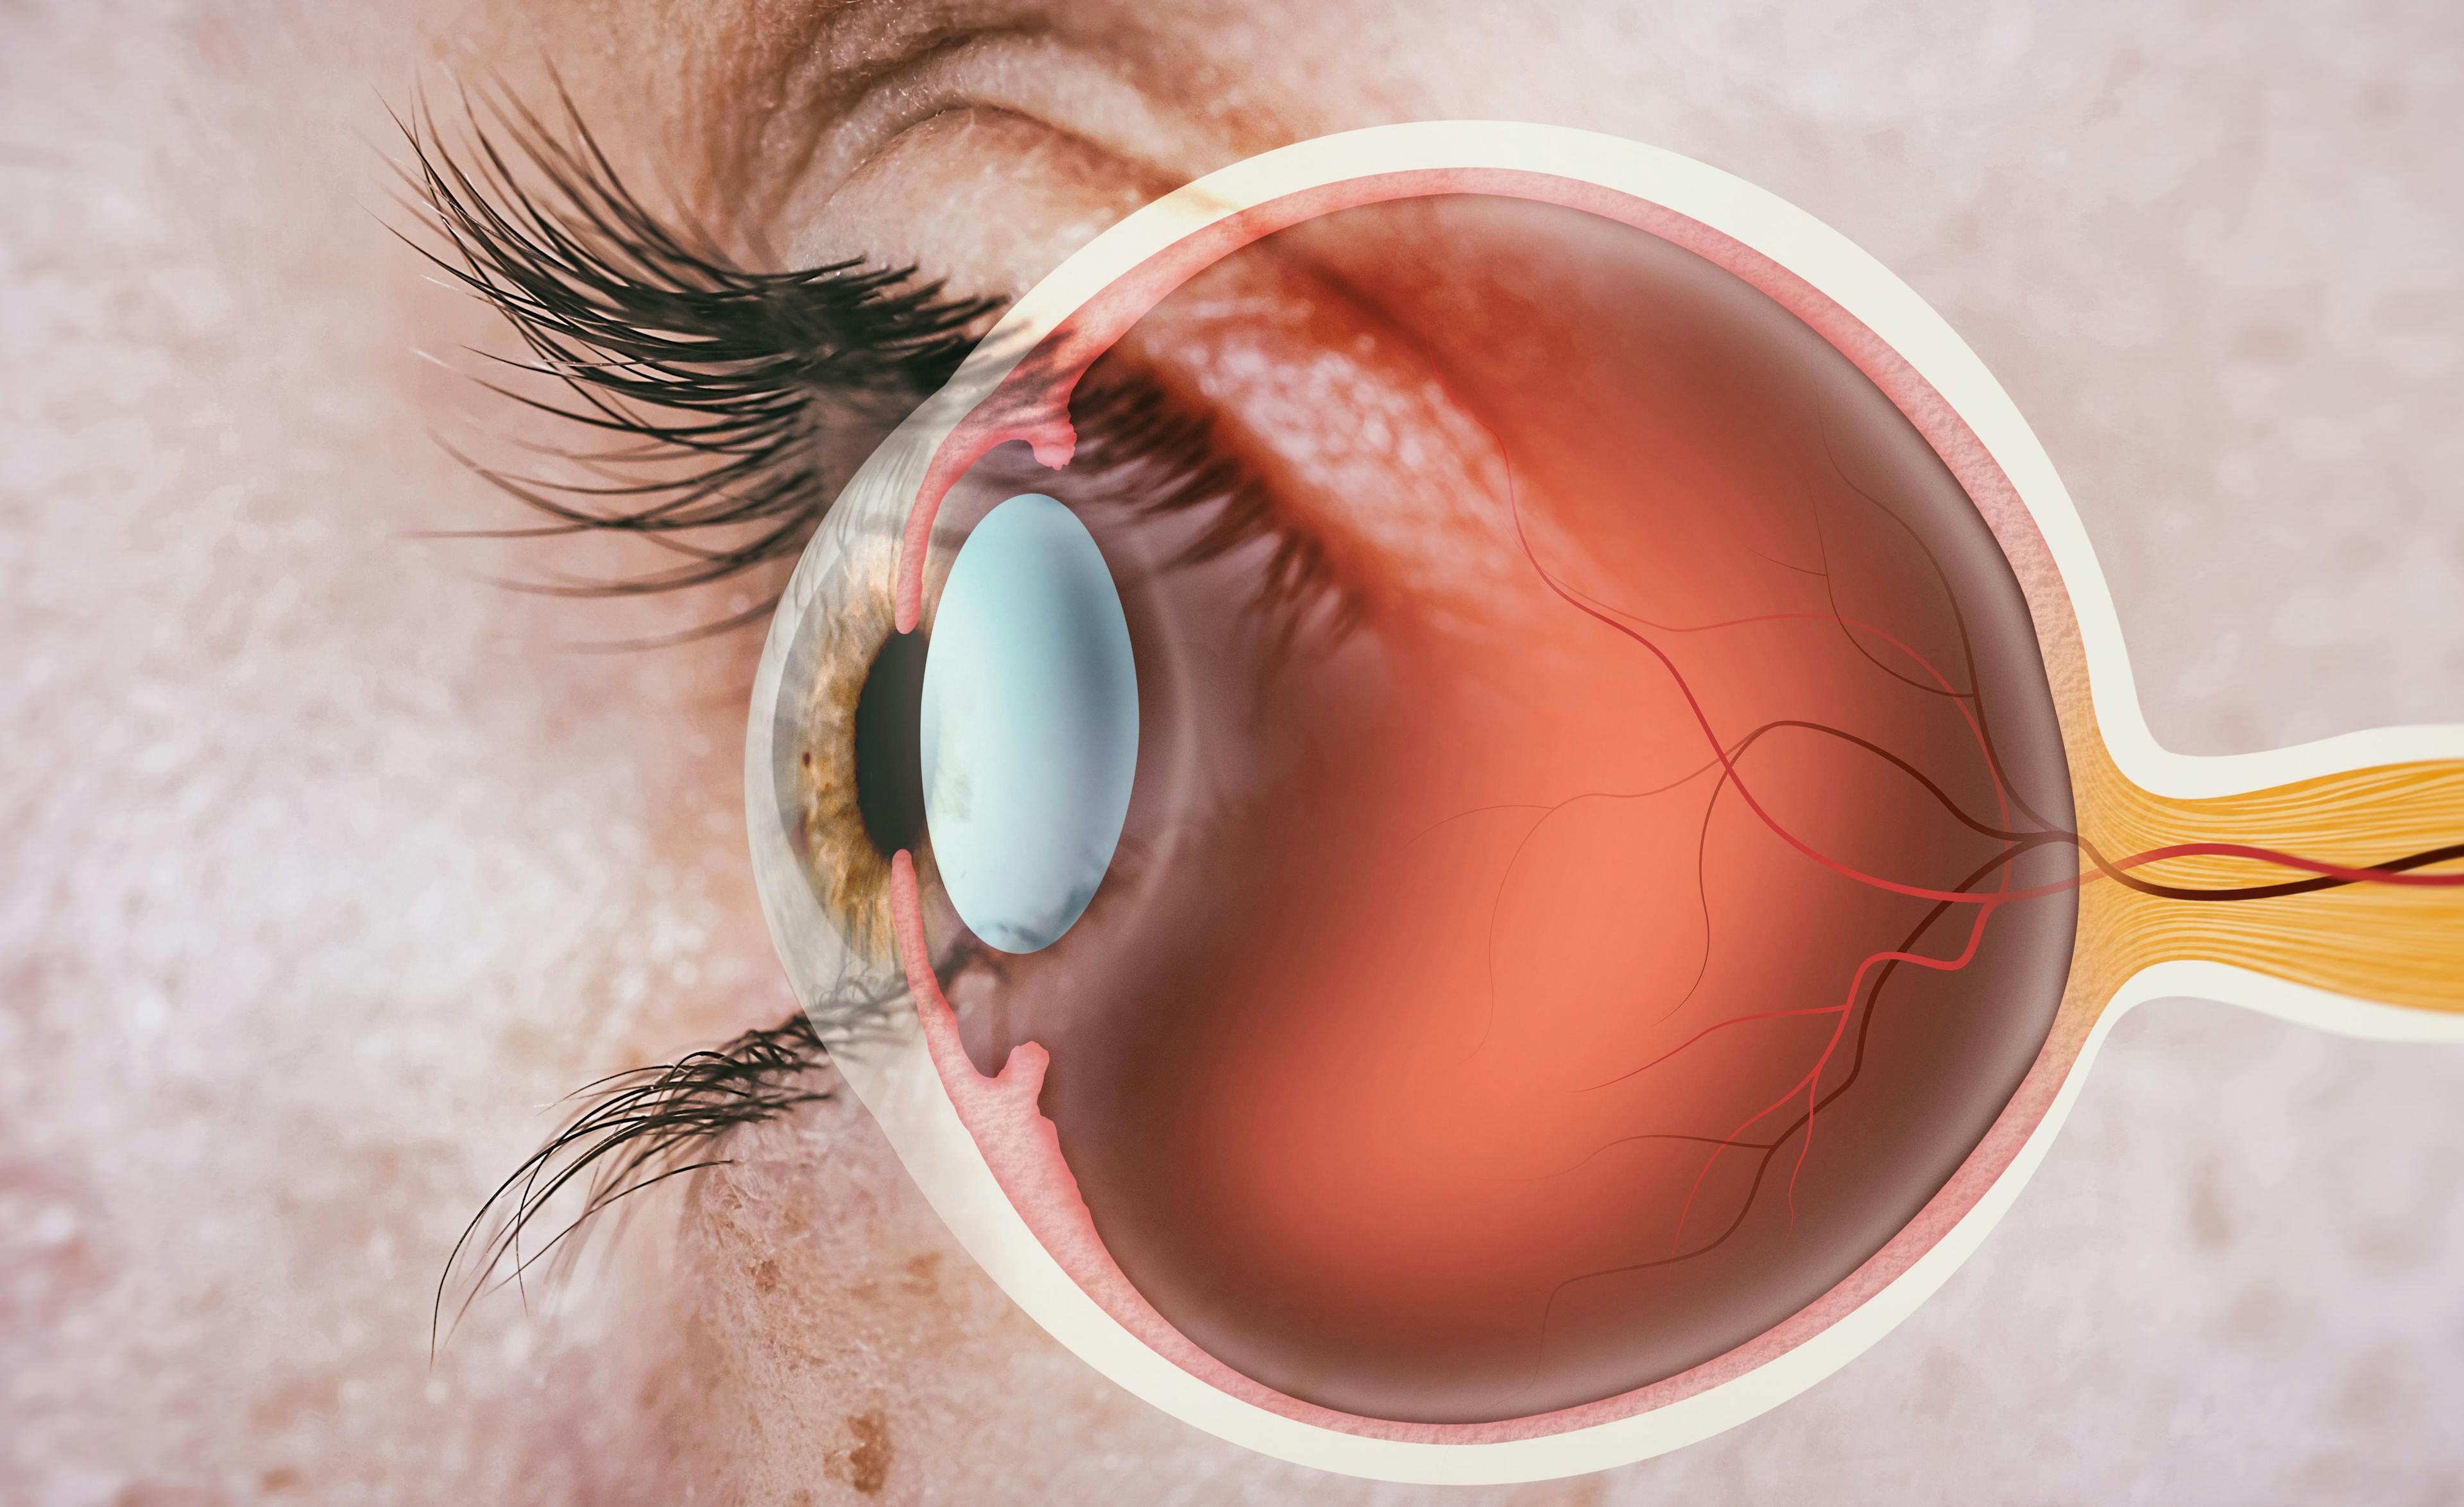 Researchers discovered that all patients had similar single surgery success rates but that minority patients had significantly worse vision outcomes and were more likely to have multiple retinal breaks.